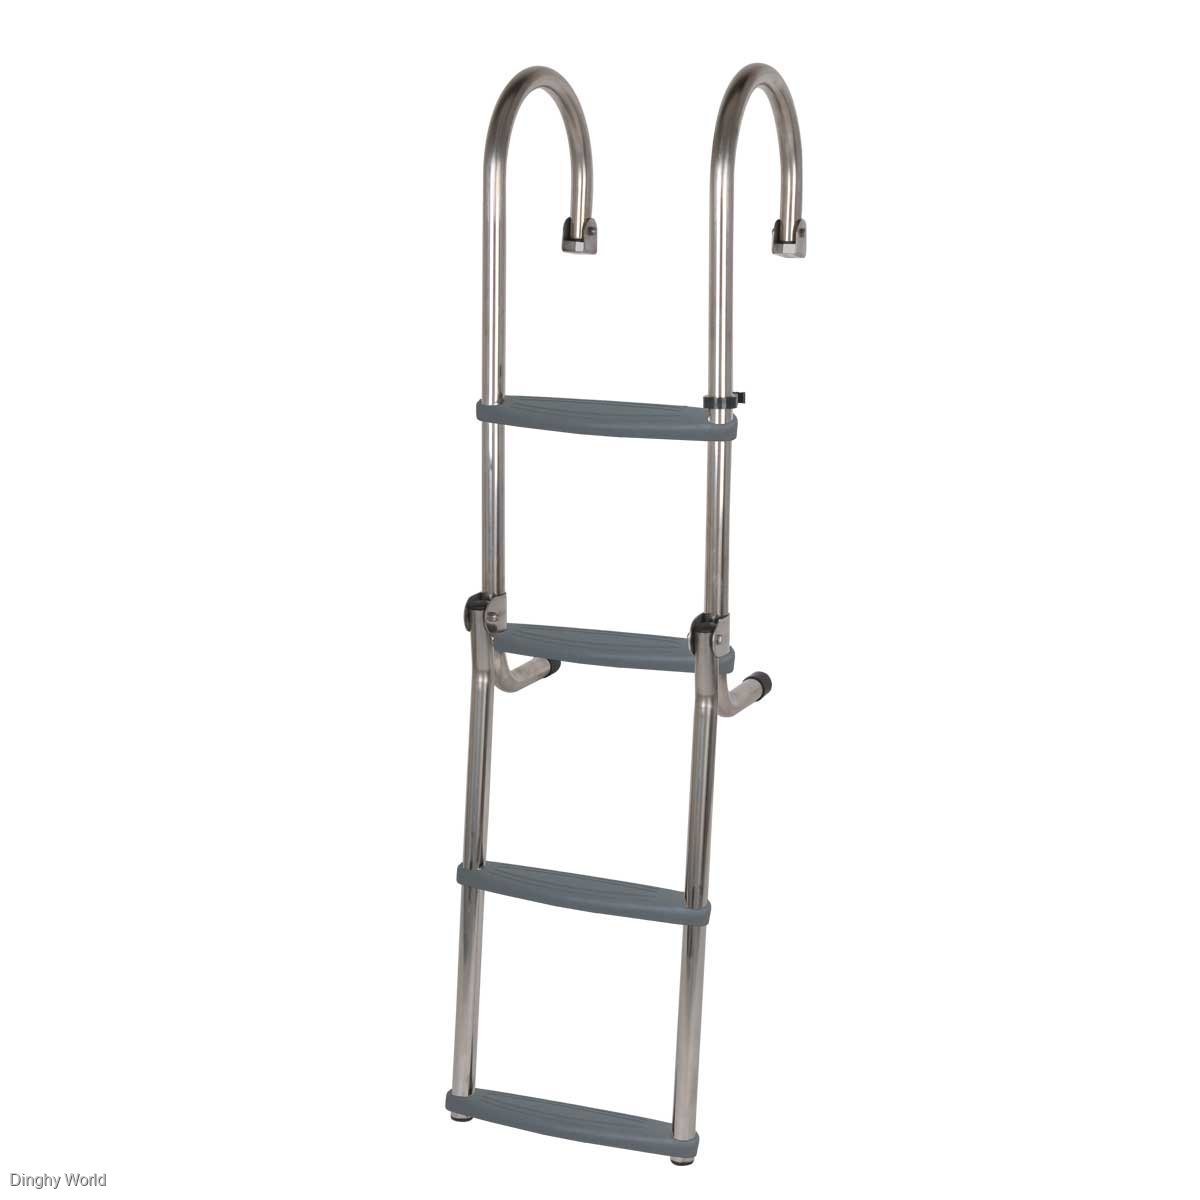 STAINLESS STEEL FOLDING LADDER - LARGE 4 STEP -GUNWALE MOUNT ONLY $ 187.00